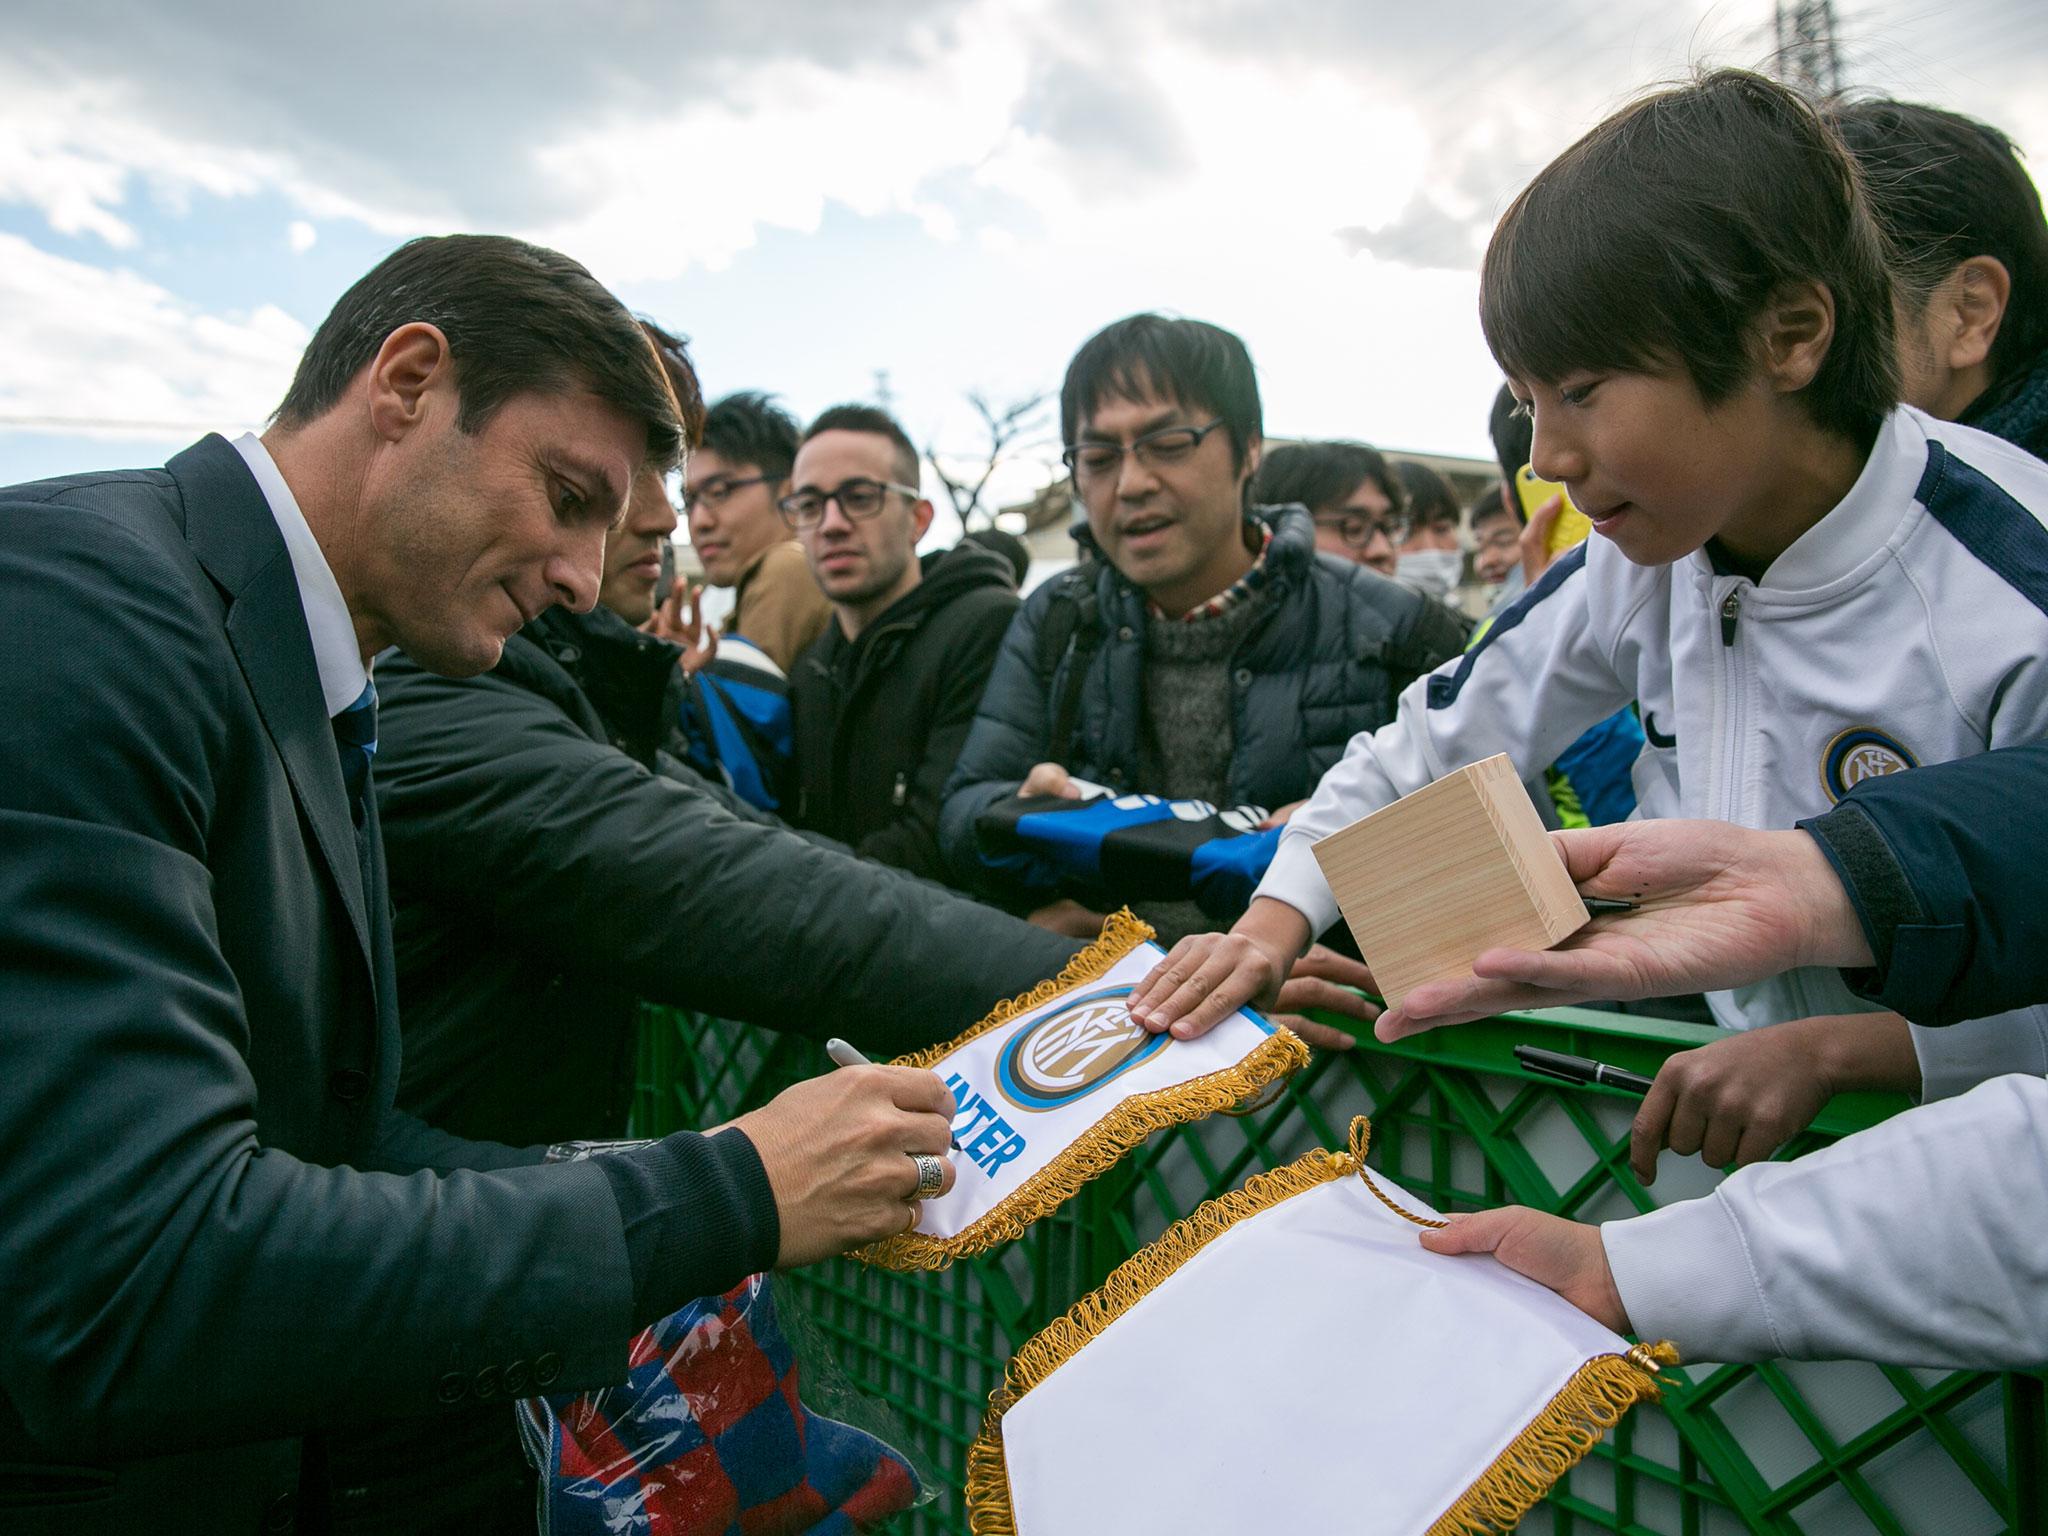 &#13;
Zanetti remains at the heart of what Inter are trying to build &#13;